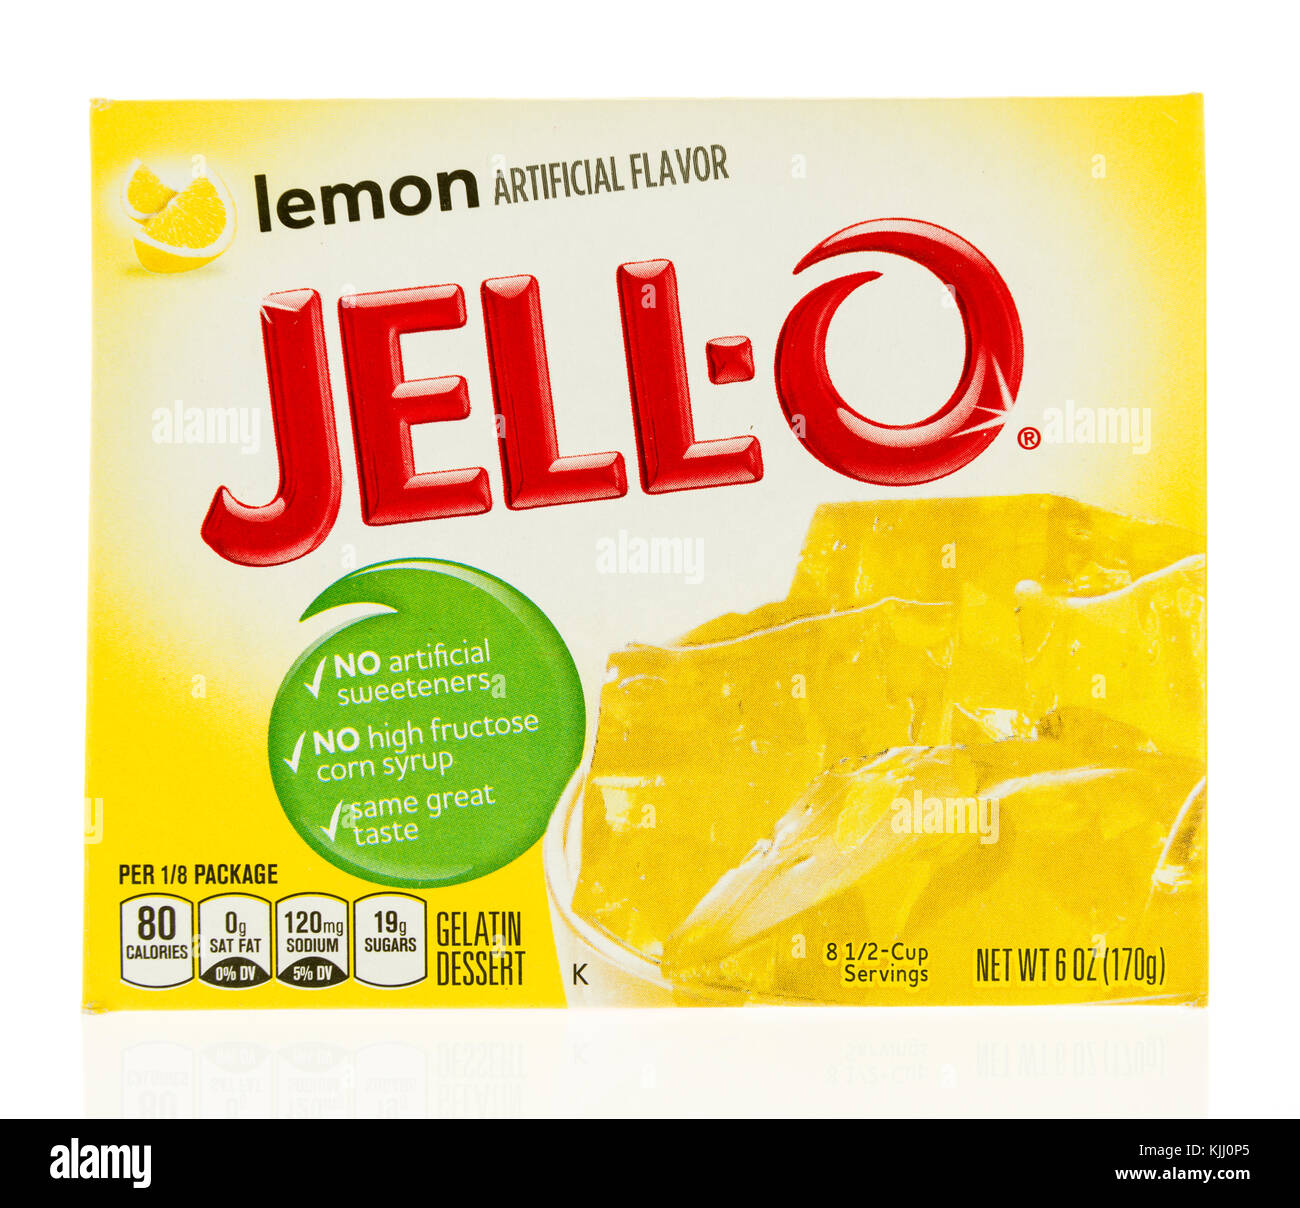 Winneconne, WI - 23 November 2017:  A box of Jello in lemon flavor with a new box box design on an on an isolated background. Stock Photo